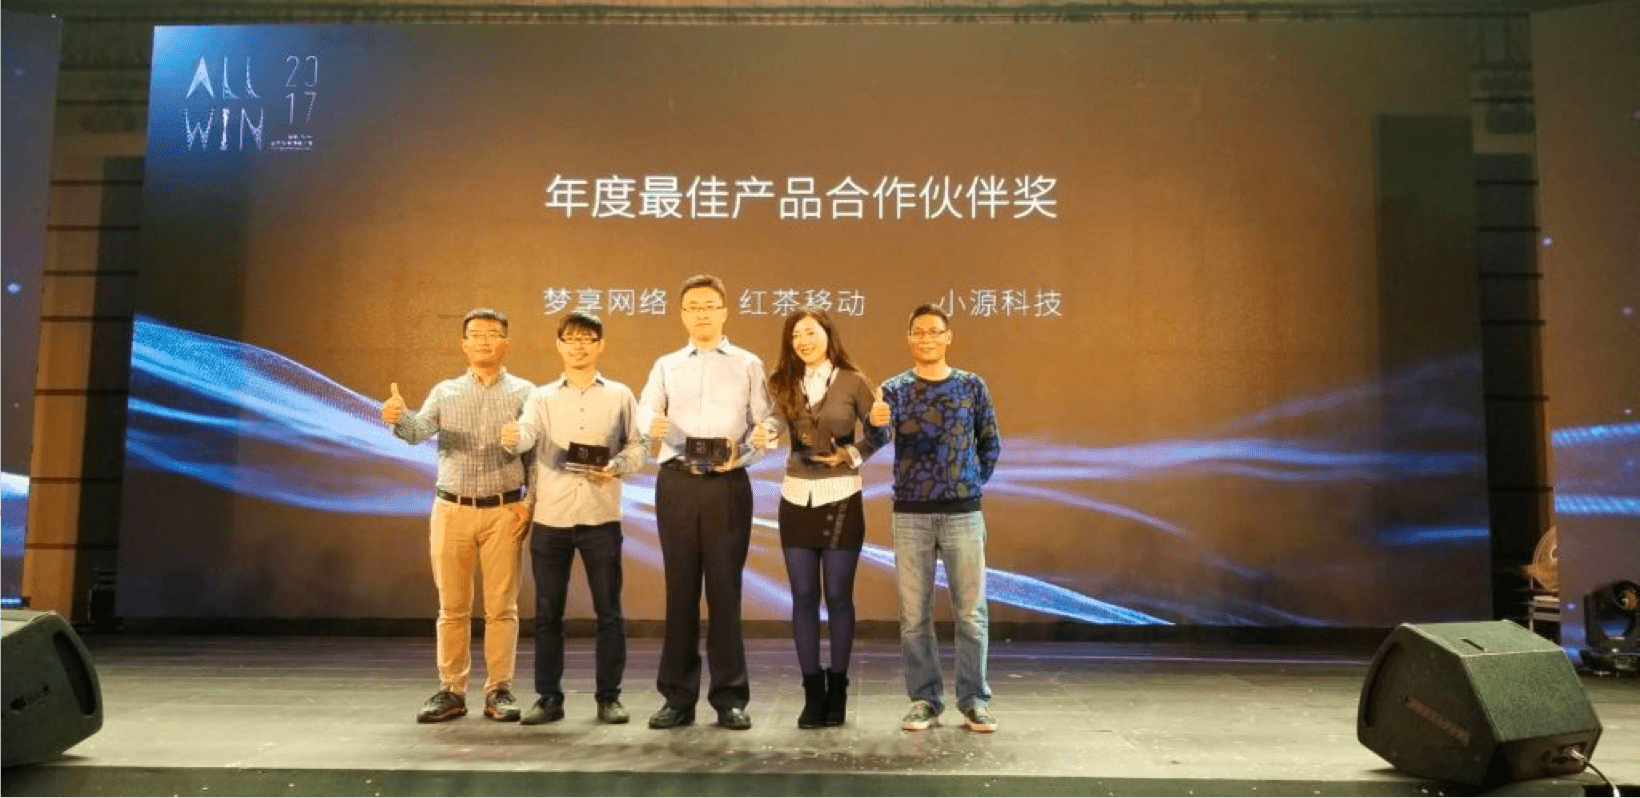 Redtea Mobile Honored as the “Meizu 2017 Best Product Partner”